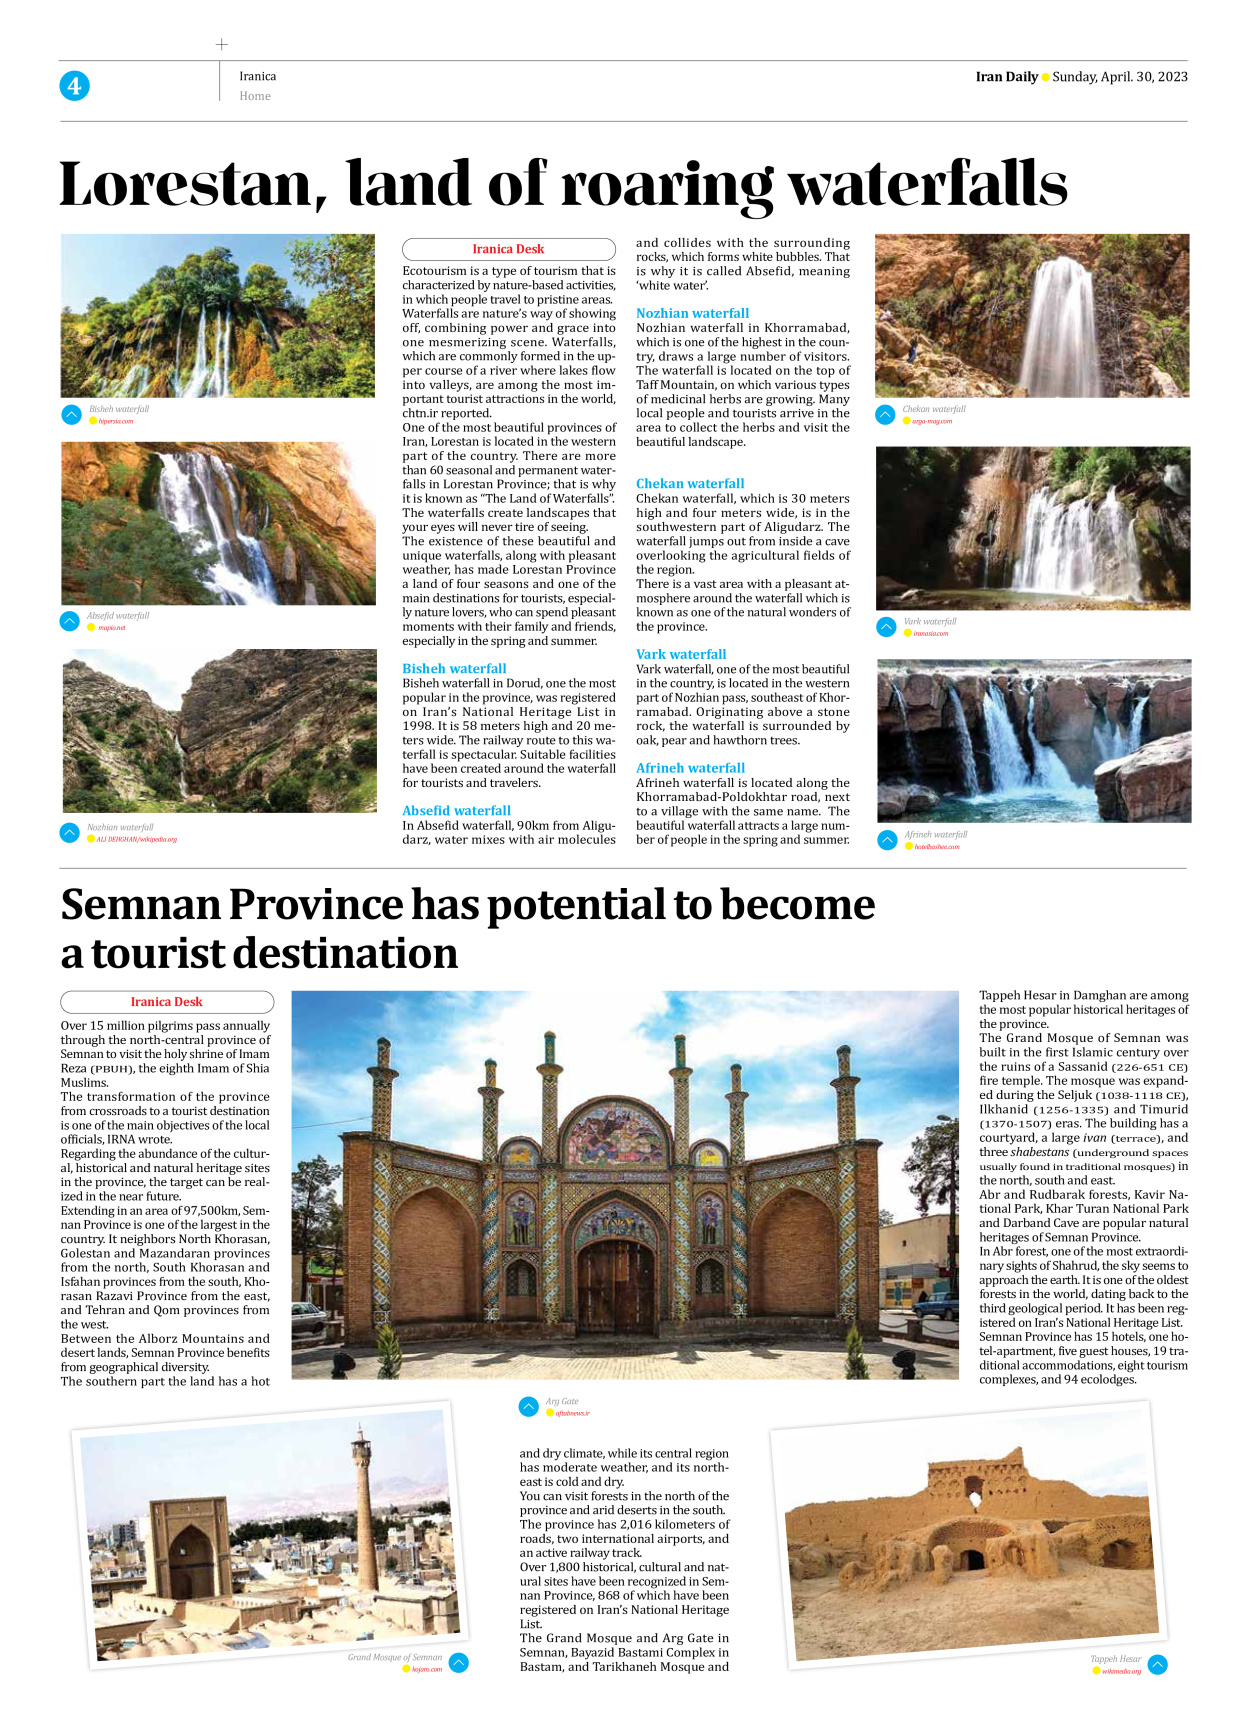 Iran Daily - Number Seven Thousand Two Hundred and Seventy Nine - 30 April 2023 - Page 4